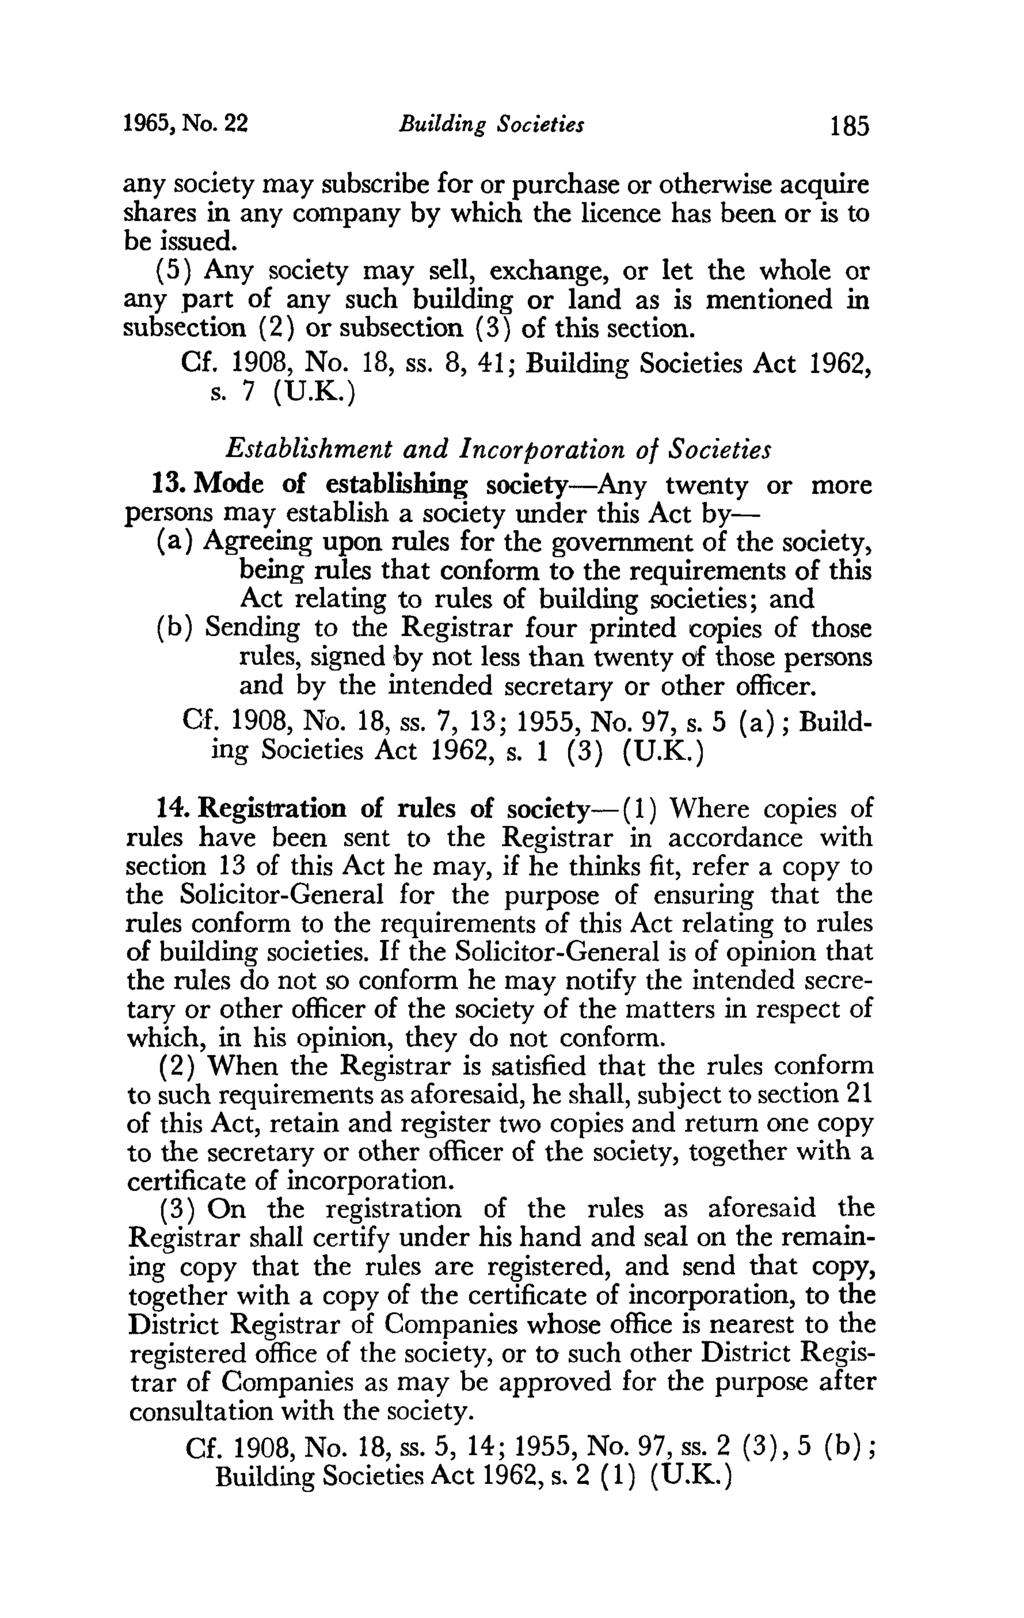 1965, No. 22 Building Societies 185 any society may subscribe for or purchase or otherwise acquire shares in any company by which the licence has been or is to be issued.